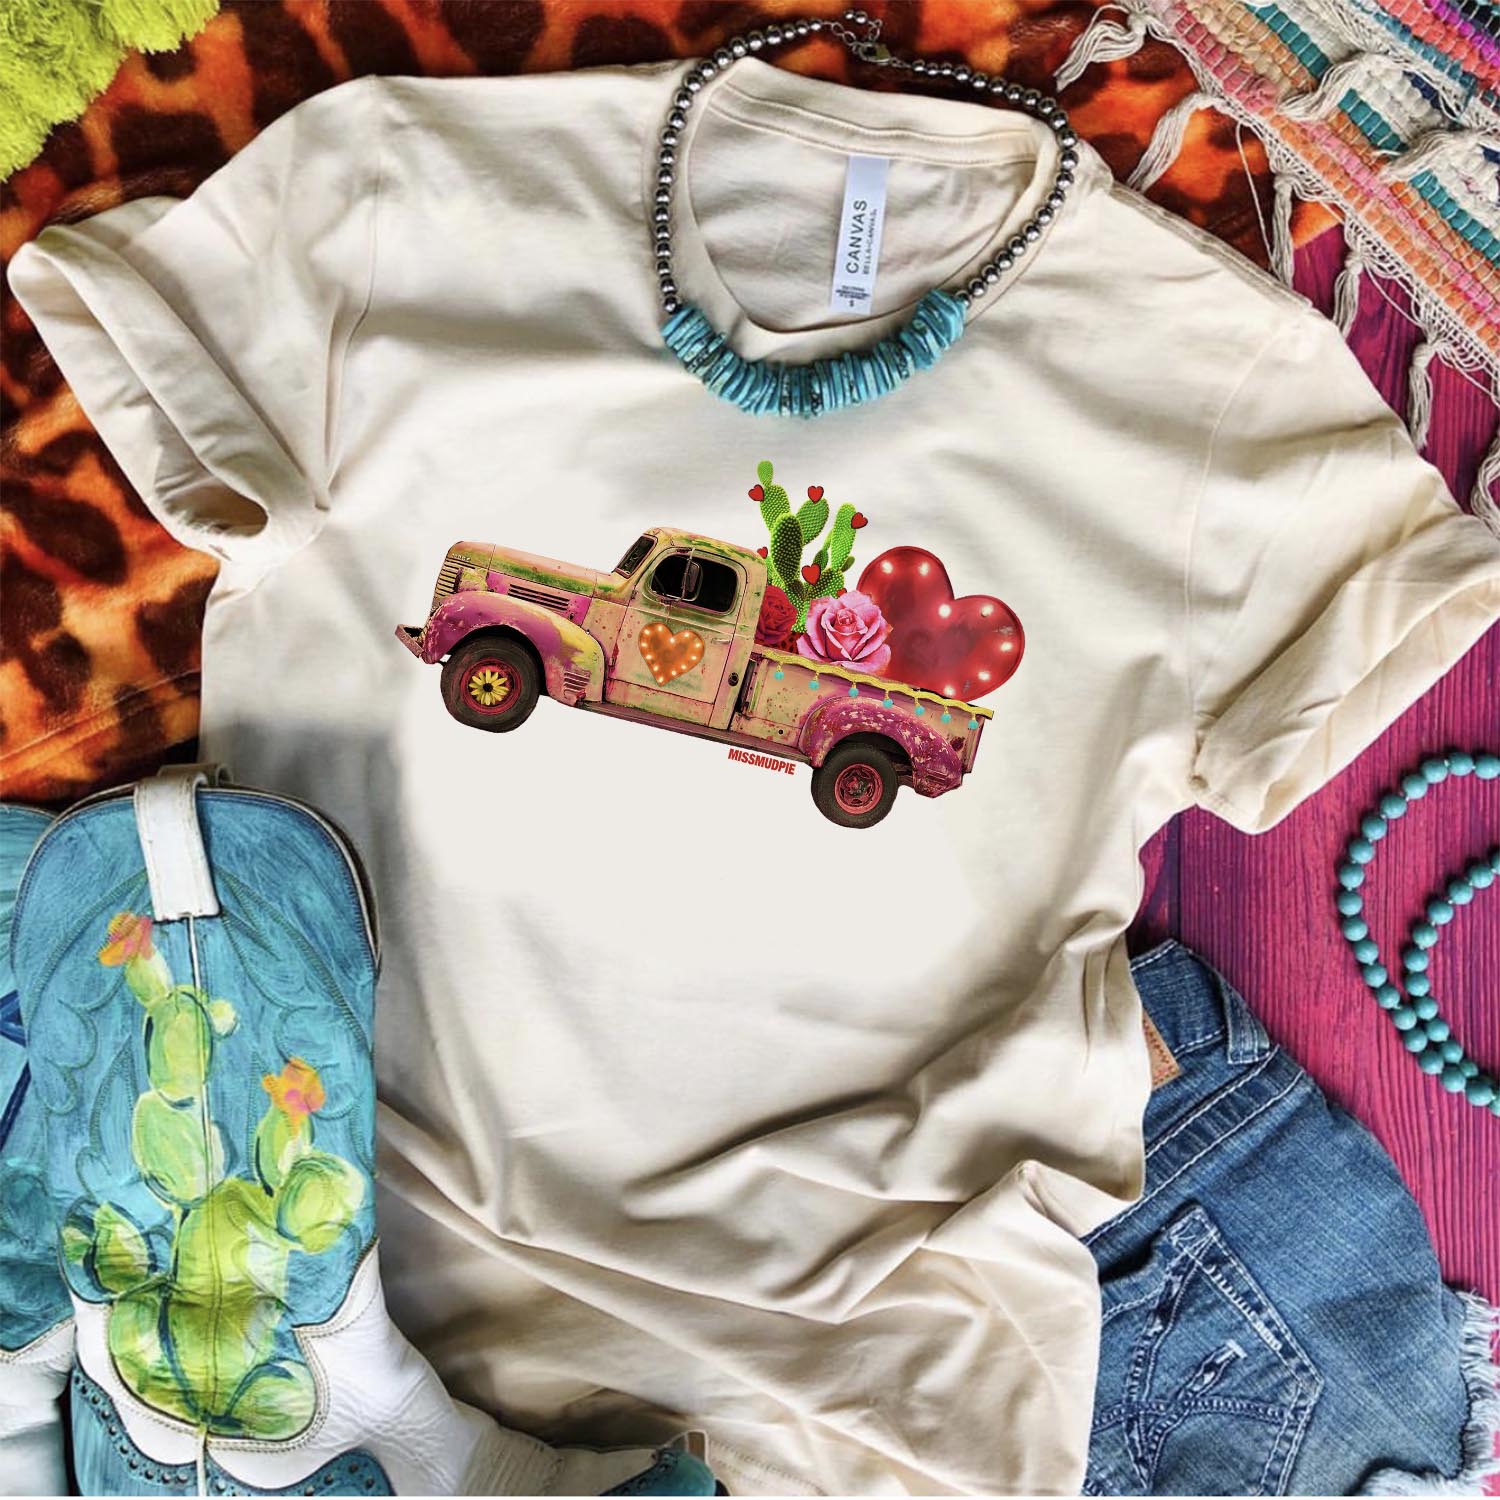 An ivory tee shirt laid on a purple wooden background with cowgirl boots, denim shorts, turquoise and silver necklace, and mix print rugs. The tee shirt has a graphic that is a rustic truck with a cactus, heart, and rose in the bed of the truck.